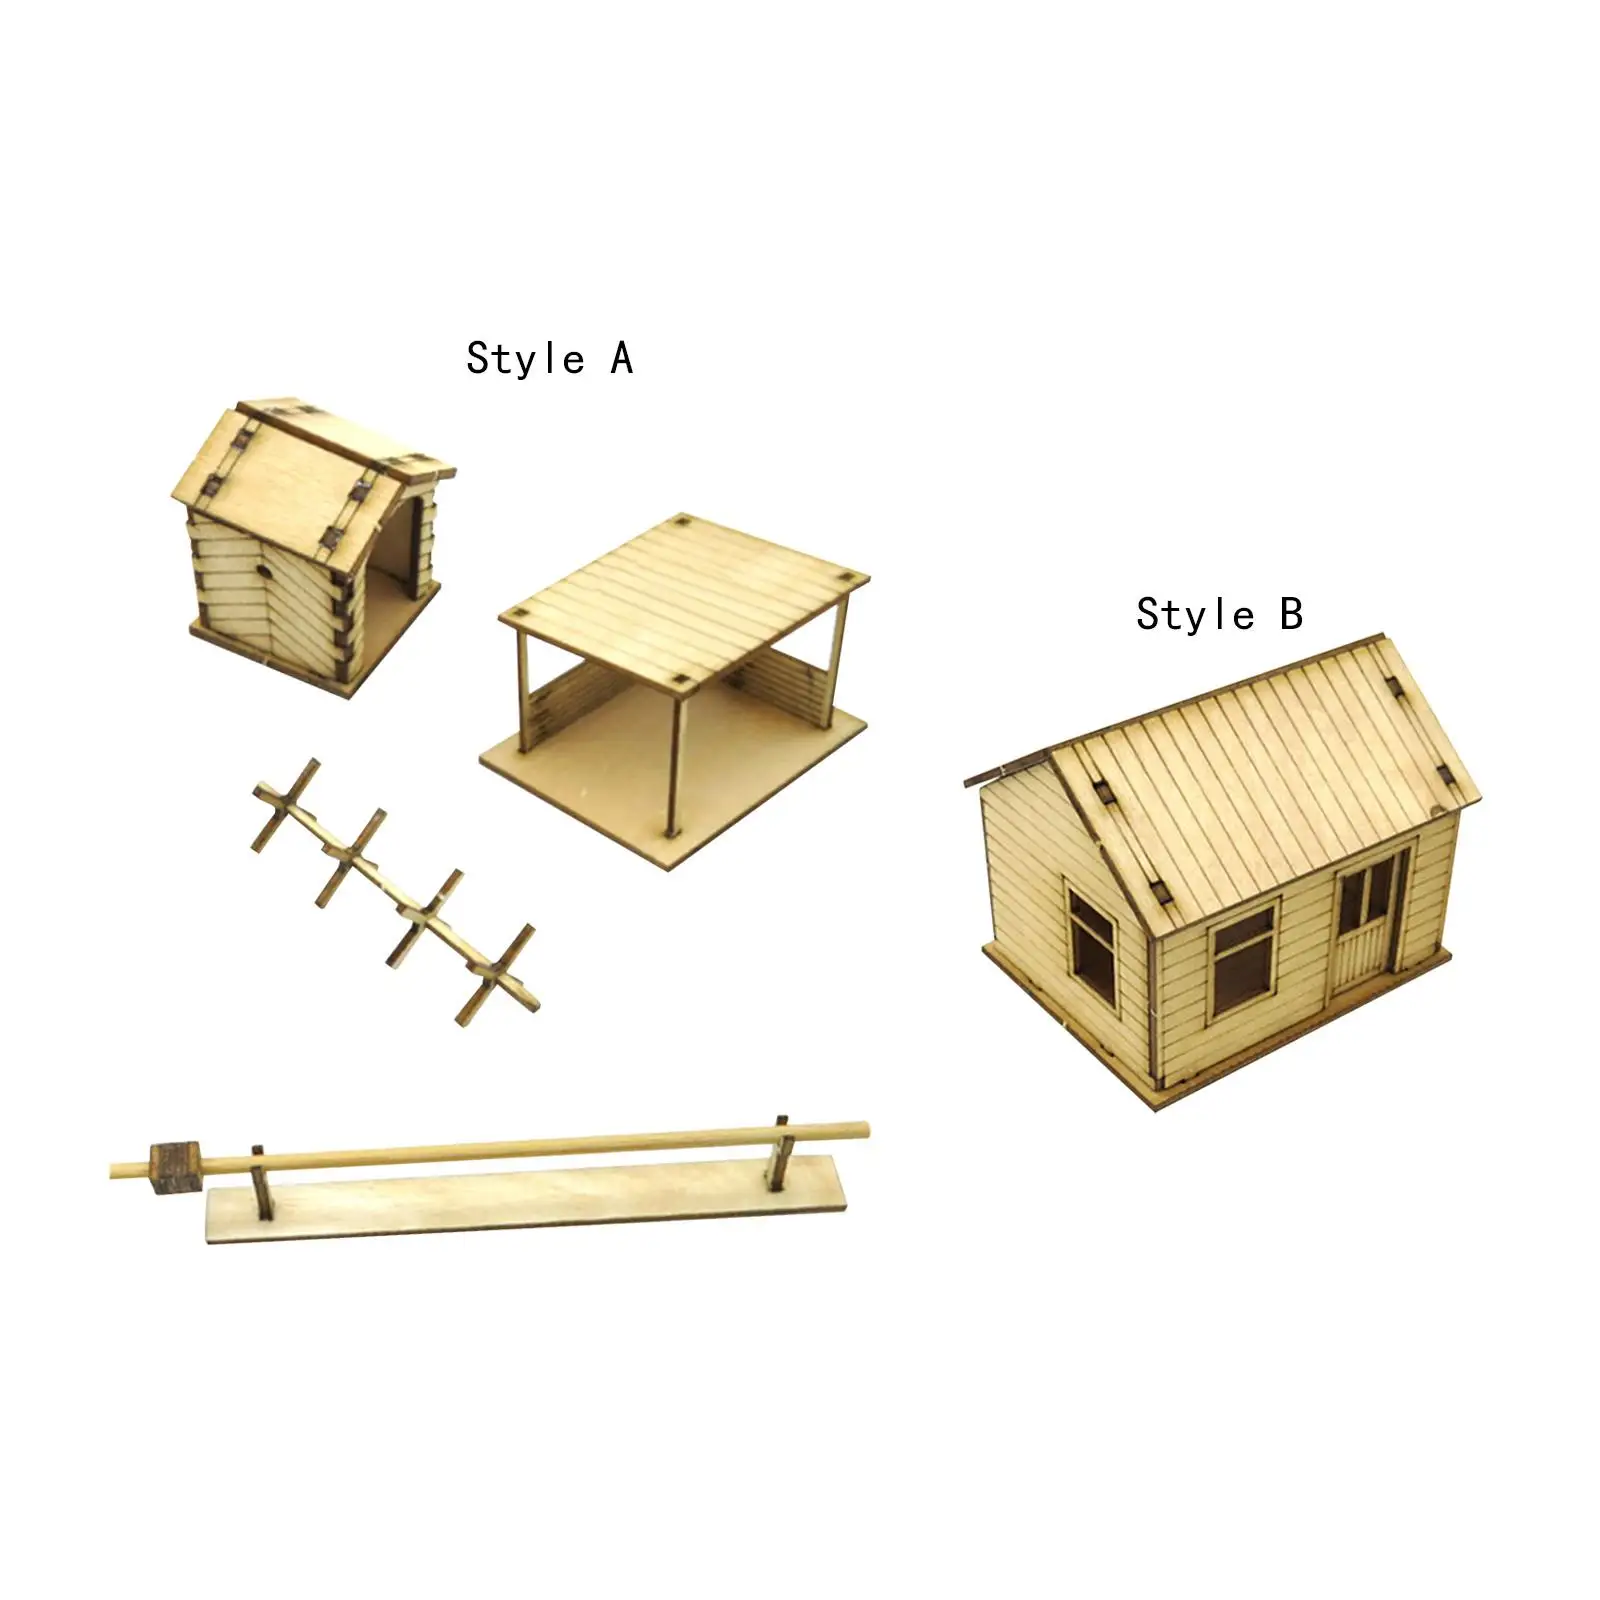 Wooden Model Kits DIY Painting DIY Crafts Handmade 1/72 European Building Model Kits for Micro Landscape Accessory Decoration